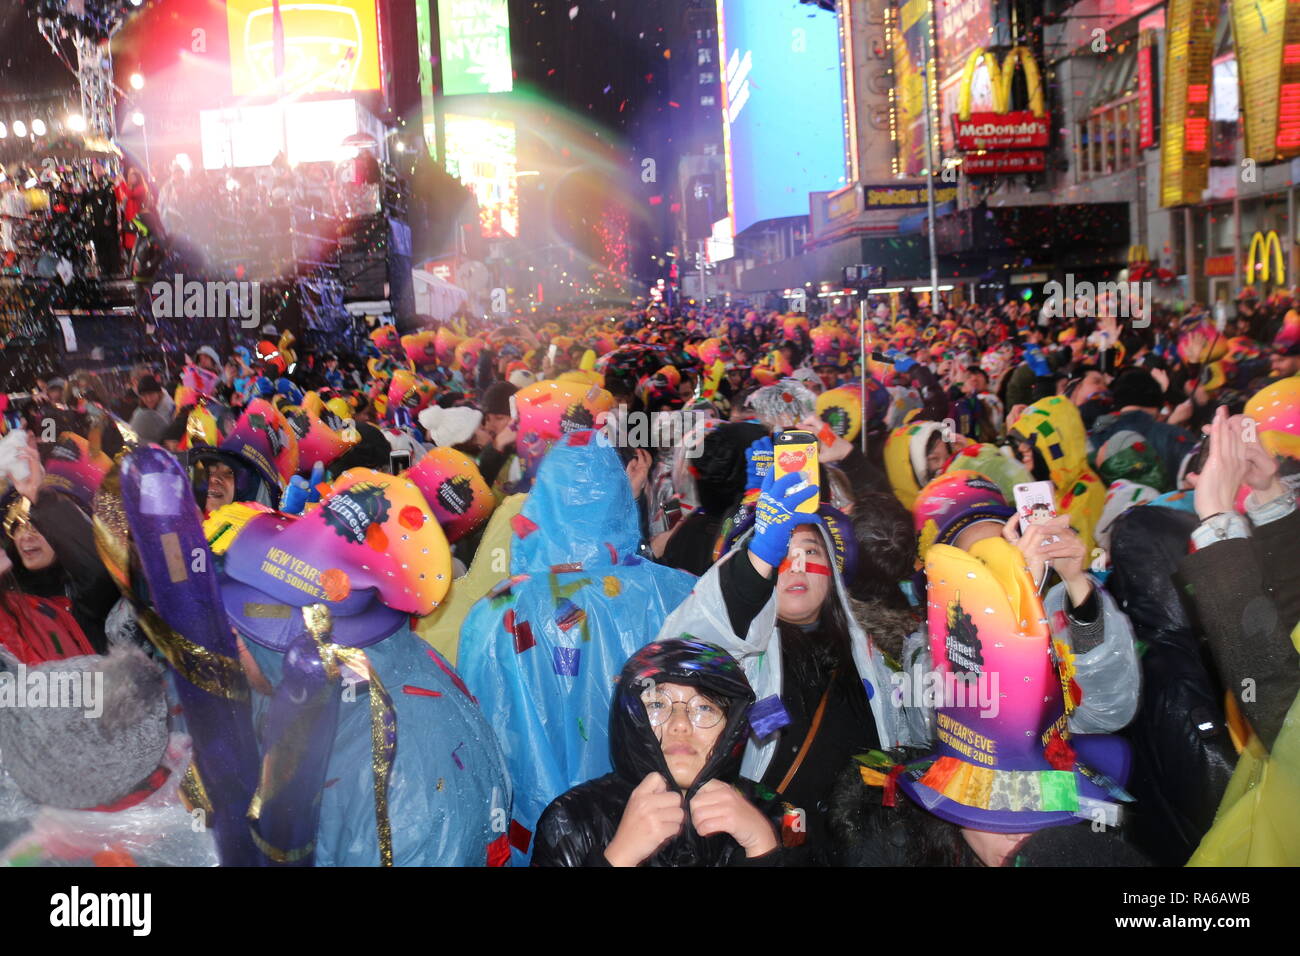 People are seen gathered at the Times Square during the New Year's Eve celebrations. Despite all day rain, More than 2 million people participate at the New Year's Eve celebrations at the Times Square. Stock Photo